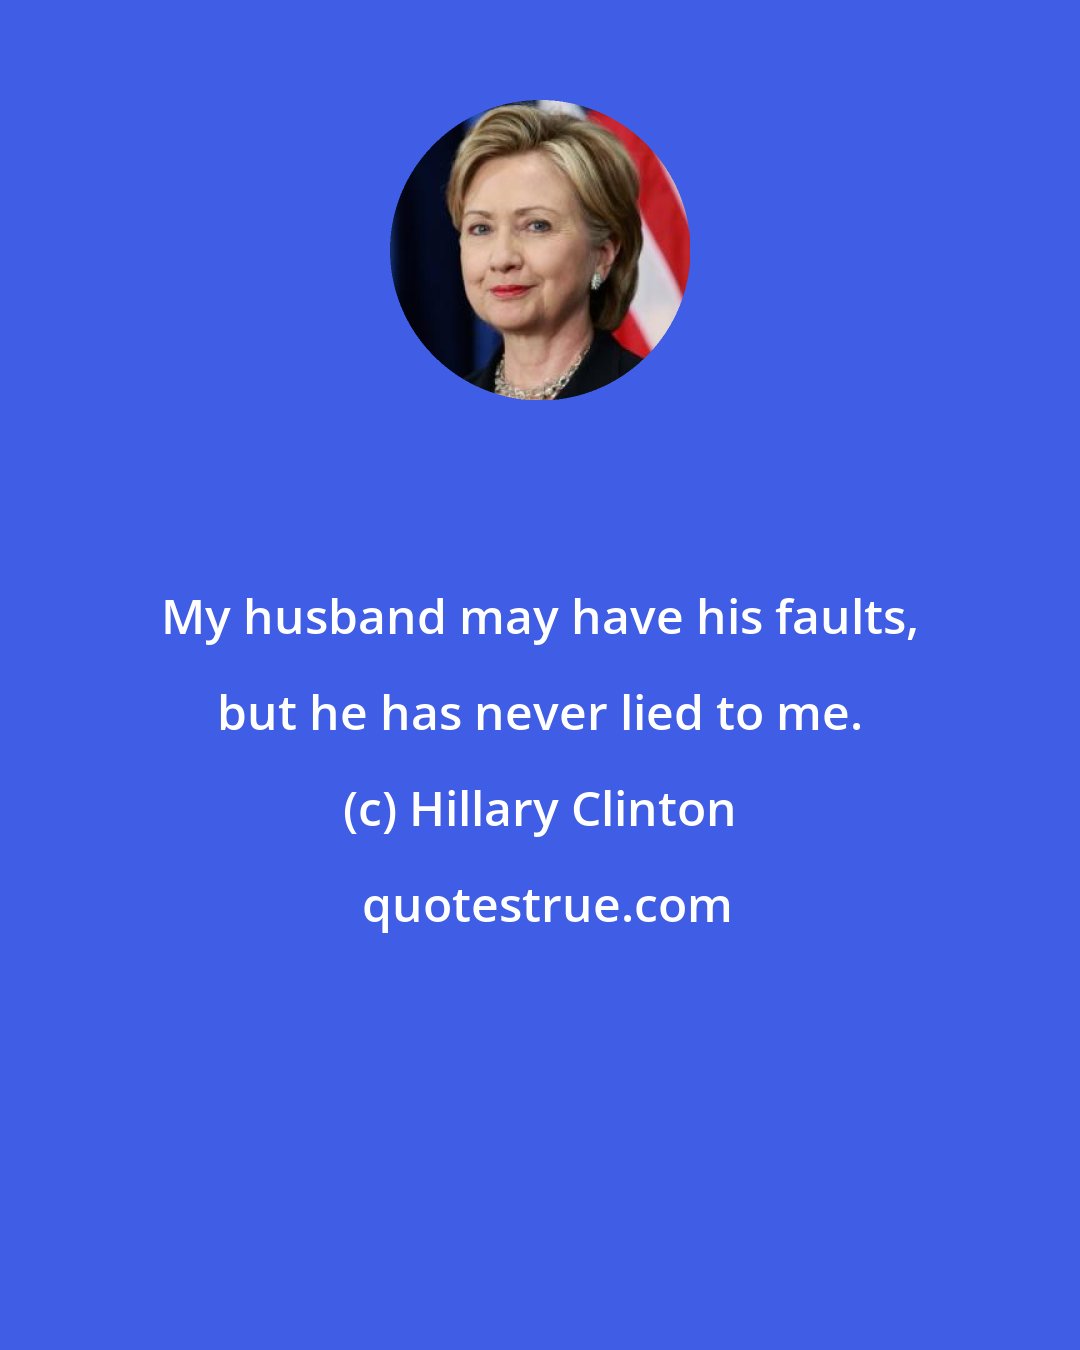 Hillary Clinton: My husband may have his faults, but he has never lied to me.